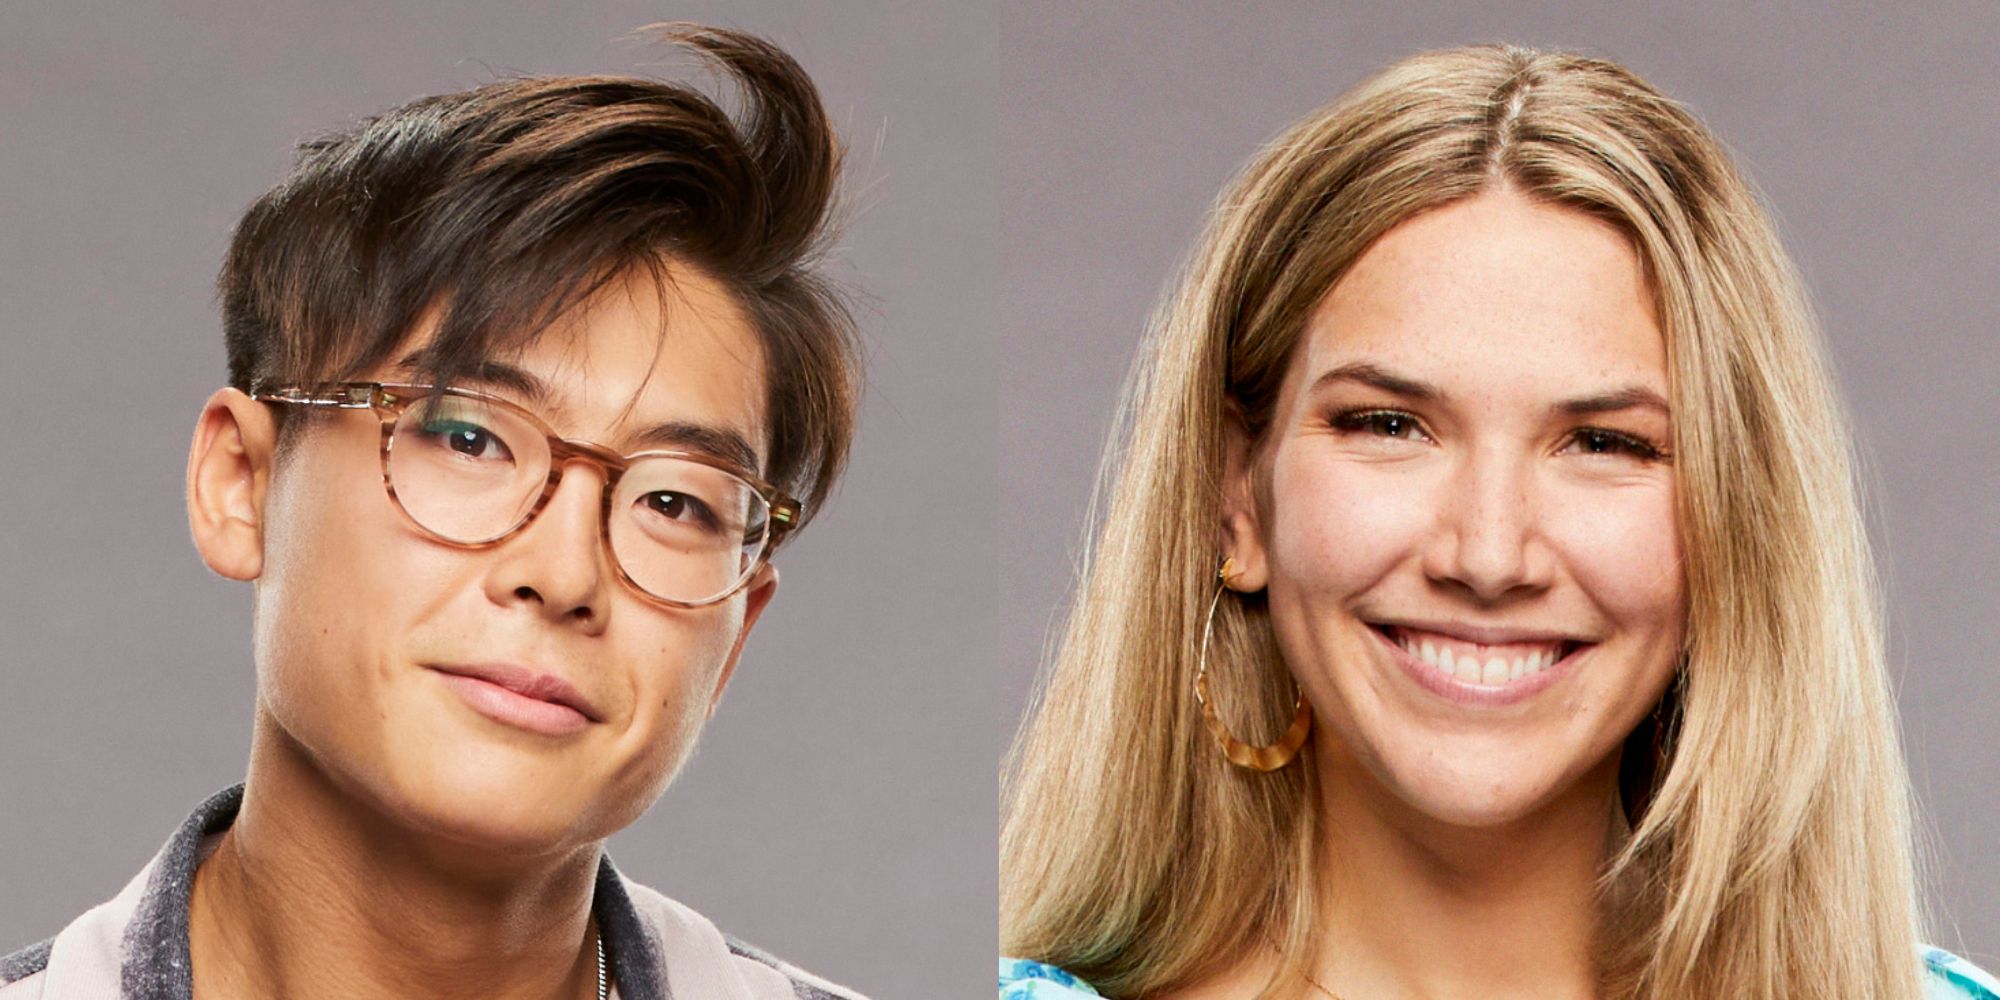 Split image of Derek Xiao and Claire Rehfuss from Big Brother and The Amazing Race smiling.